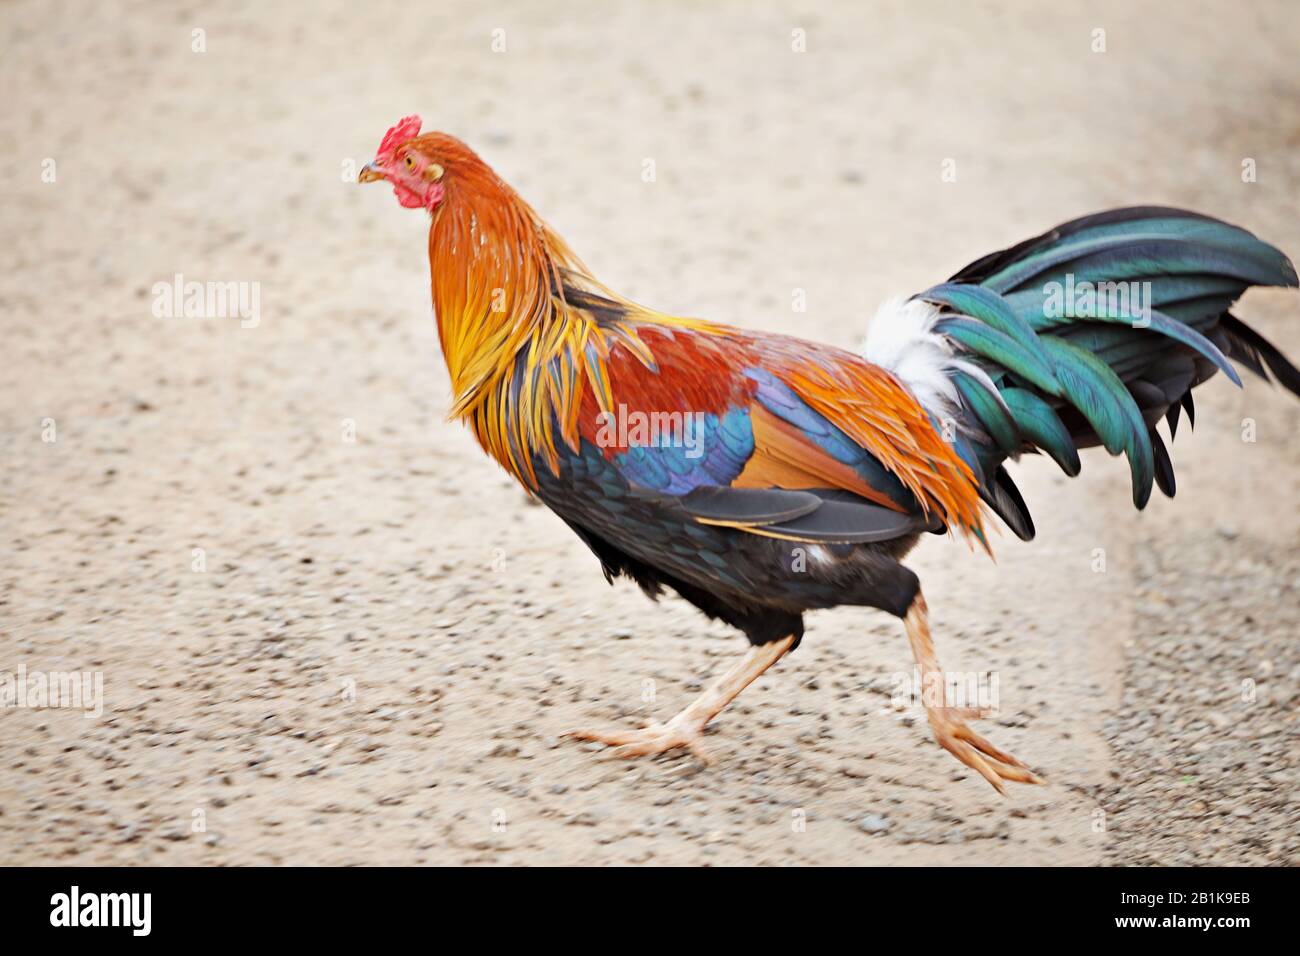 Running rooster Stock Photo